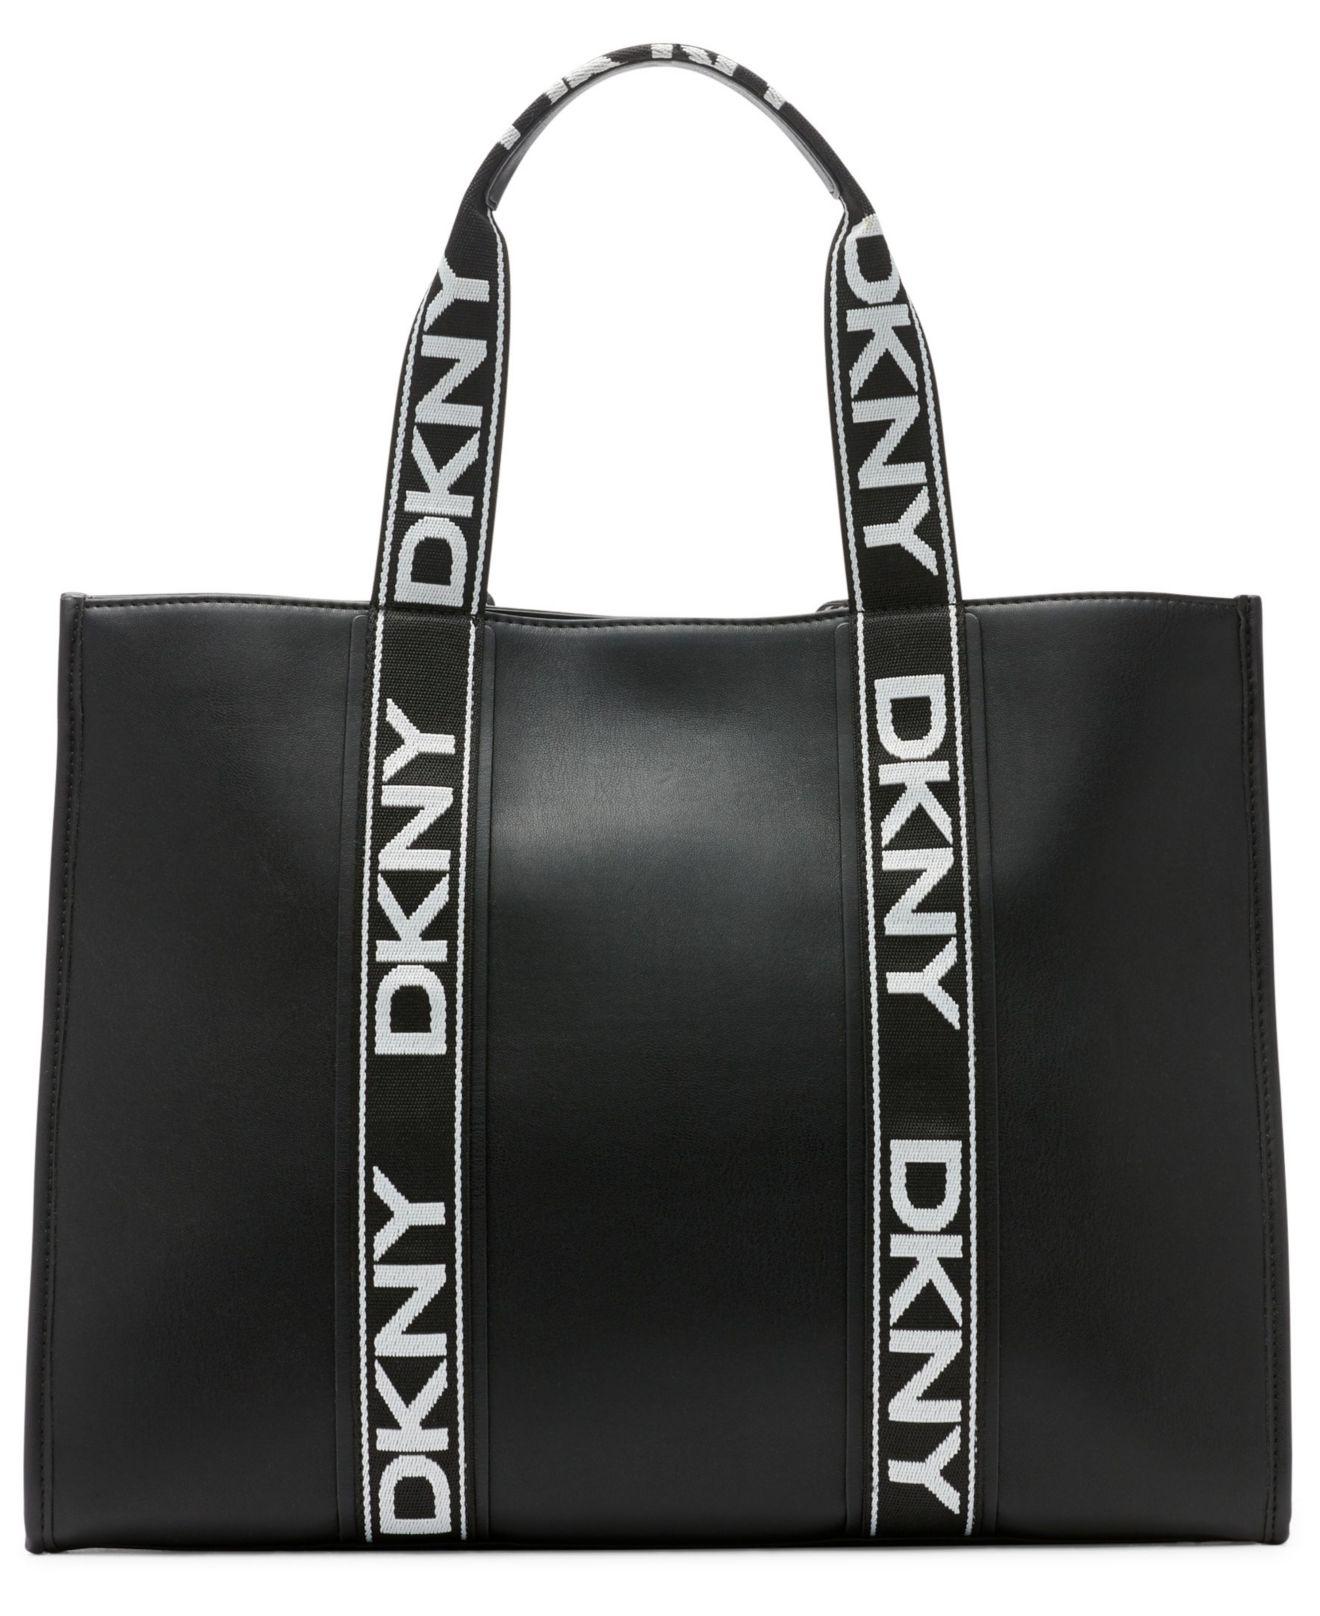 DKNY Cassie Large Tote in Black